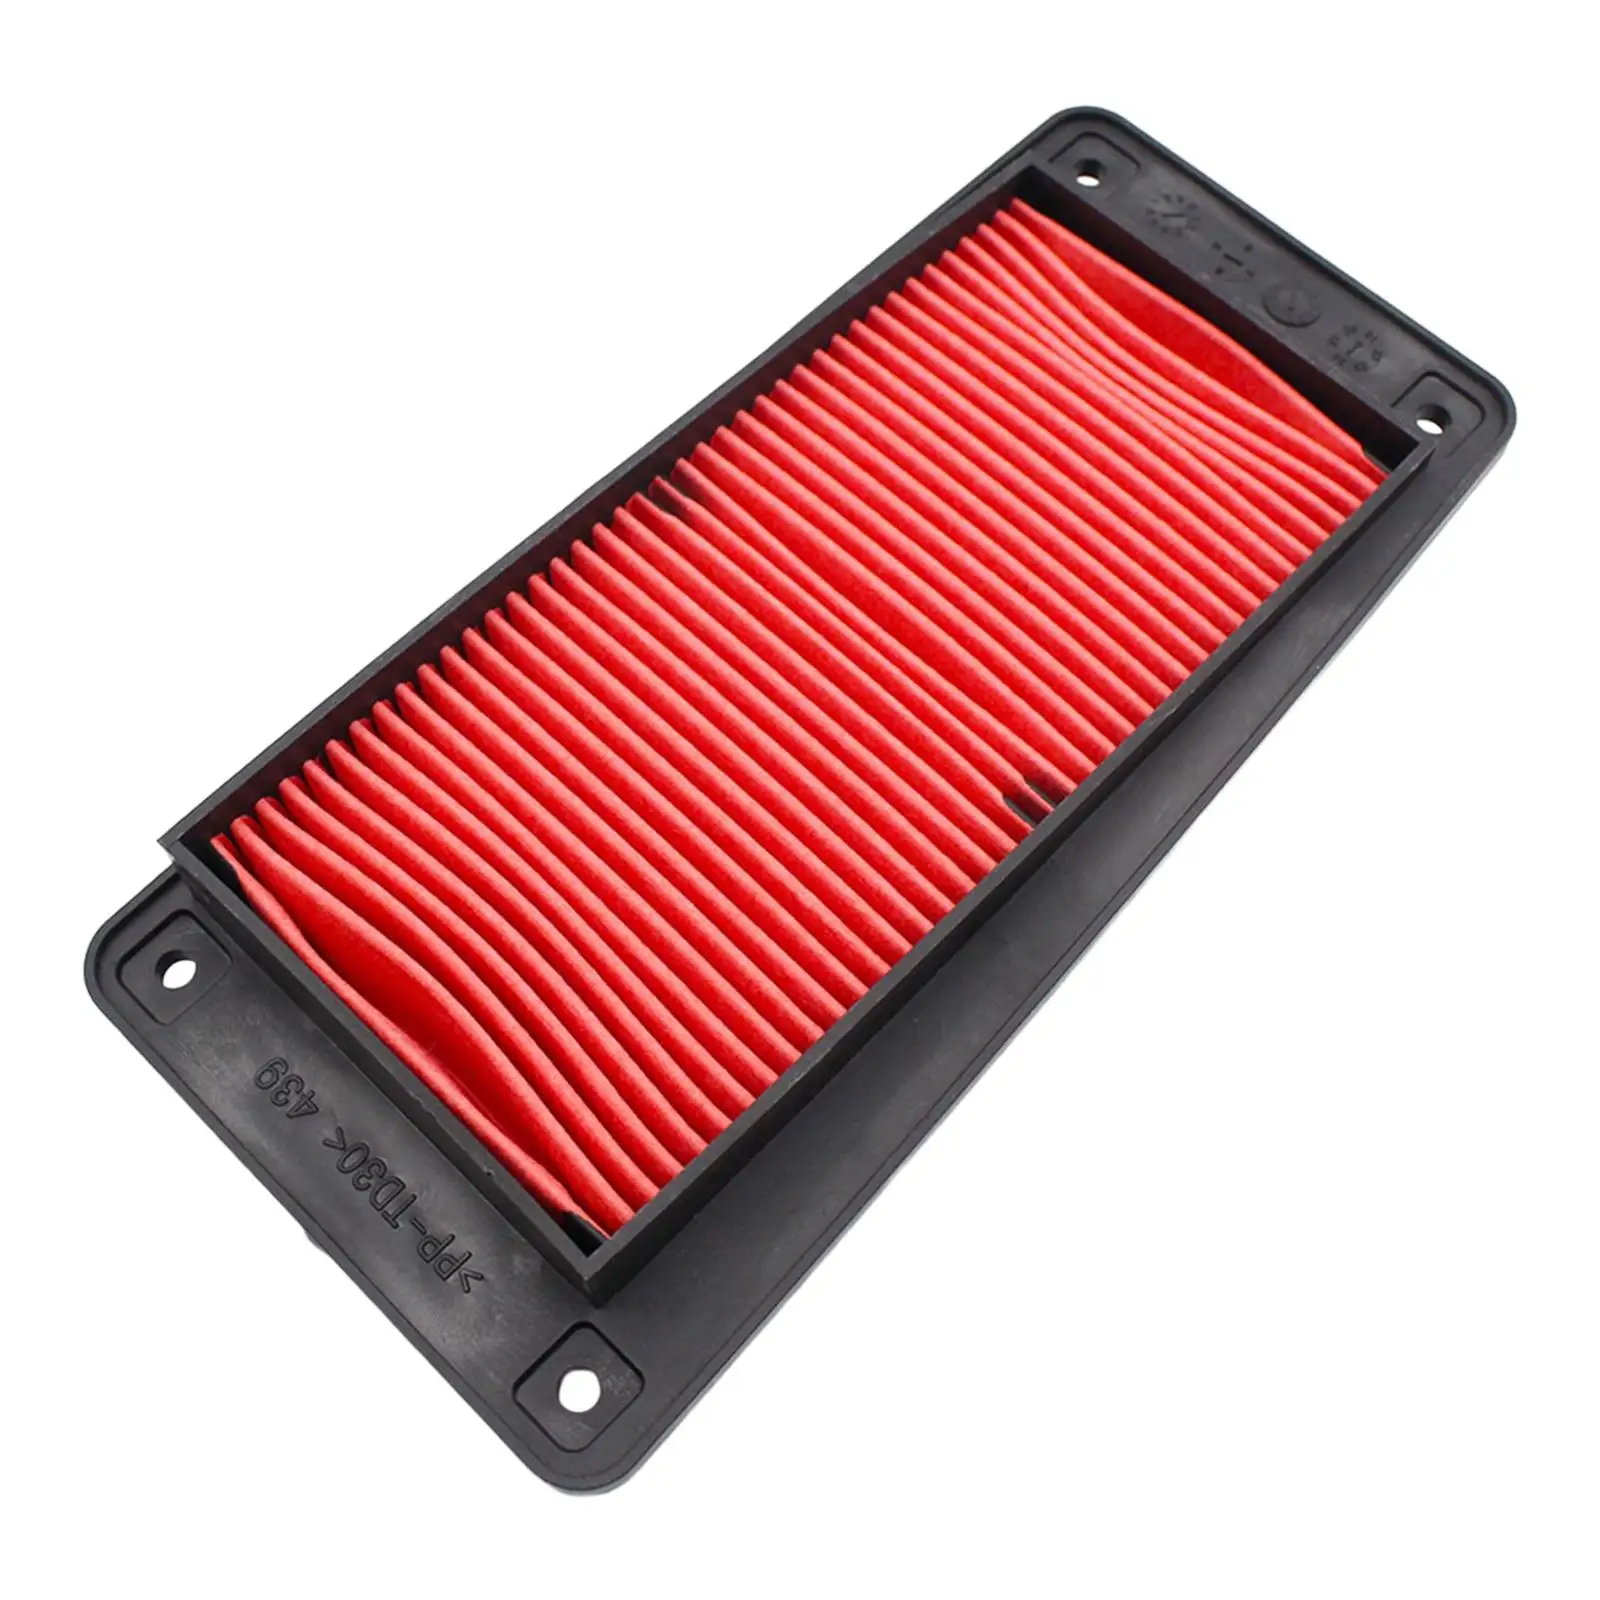 Motorcycle Air Filter Breathers Direct Replaces Reusable Accessories